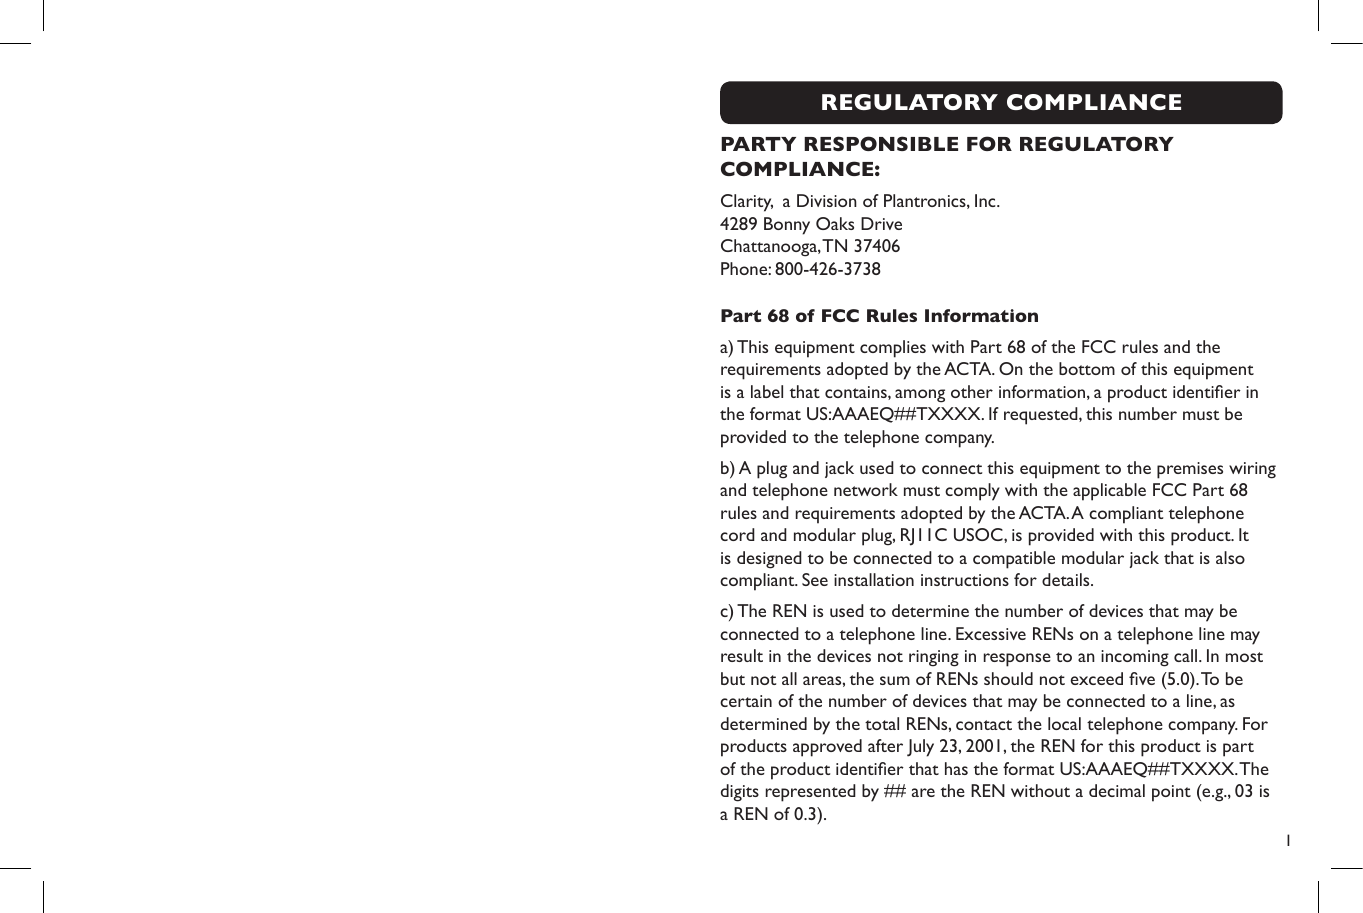  1REGULATORY COMPLIANCEPARTY RESPONSIBLE FOR REGULATORY COMPLIANCE:Clarity,  a Division of Plantronics, Inc. 4289 Bonny Oaks Drive   Chattanooga, TN 37406 Phone: 800-426-3738Part 68 of FCC Rules Informationa) This equipment complies with Part 68 of the FCC rules and the requirements adopted by the ACTA. On the bottom of this equipment is a label that contains, among other information, a product identier in the format US:AAAEQ##TXXXX. If requested, this number must be provided to the telephone company.b) A plug and jack used to connect this equipment to the premises wiring and telephone network must comply with the applicable FCC Part 68 rules and requirements adopted by the ACTA. A compliant telephone cord and modular plug, RJ11C USOC, is provided with this product. It is designed to be connected to a compatible modular jack that is also compliant. See installation instructions for details.c) The REN is used to determine the number of devices that may be connected to a telephone line. Excessive RENs on a telephone line may result in the devices not ringing in response to an incoming call. In most but not all areas, the sum of RENs should not exceed ve (5.0). To be certain of the number of devices that may be connected to a line, as determined by the total RENs, contact the local telephone company. For products approved after July 23, 2001, the REN for this product is part of the product identier that has the format US:AAAEQ##TXXXX. The digits represented by ## are the REN without a decimal point (e.g., 03 is a REN of 0.3). 